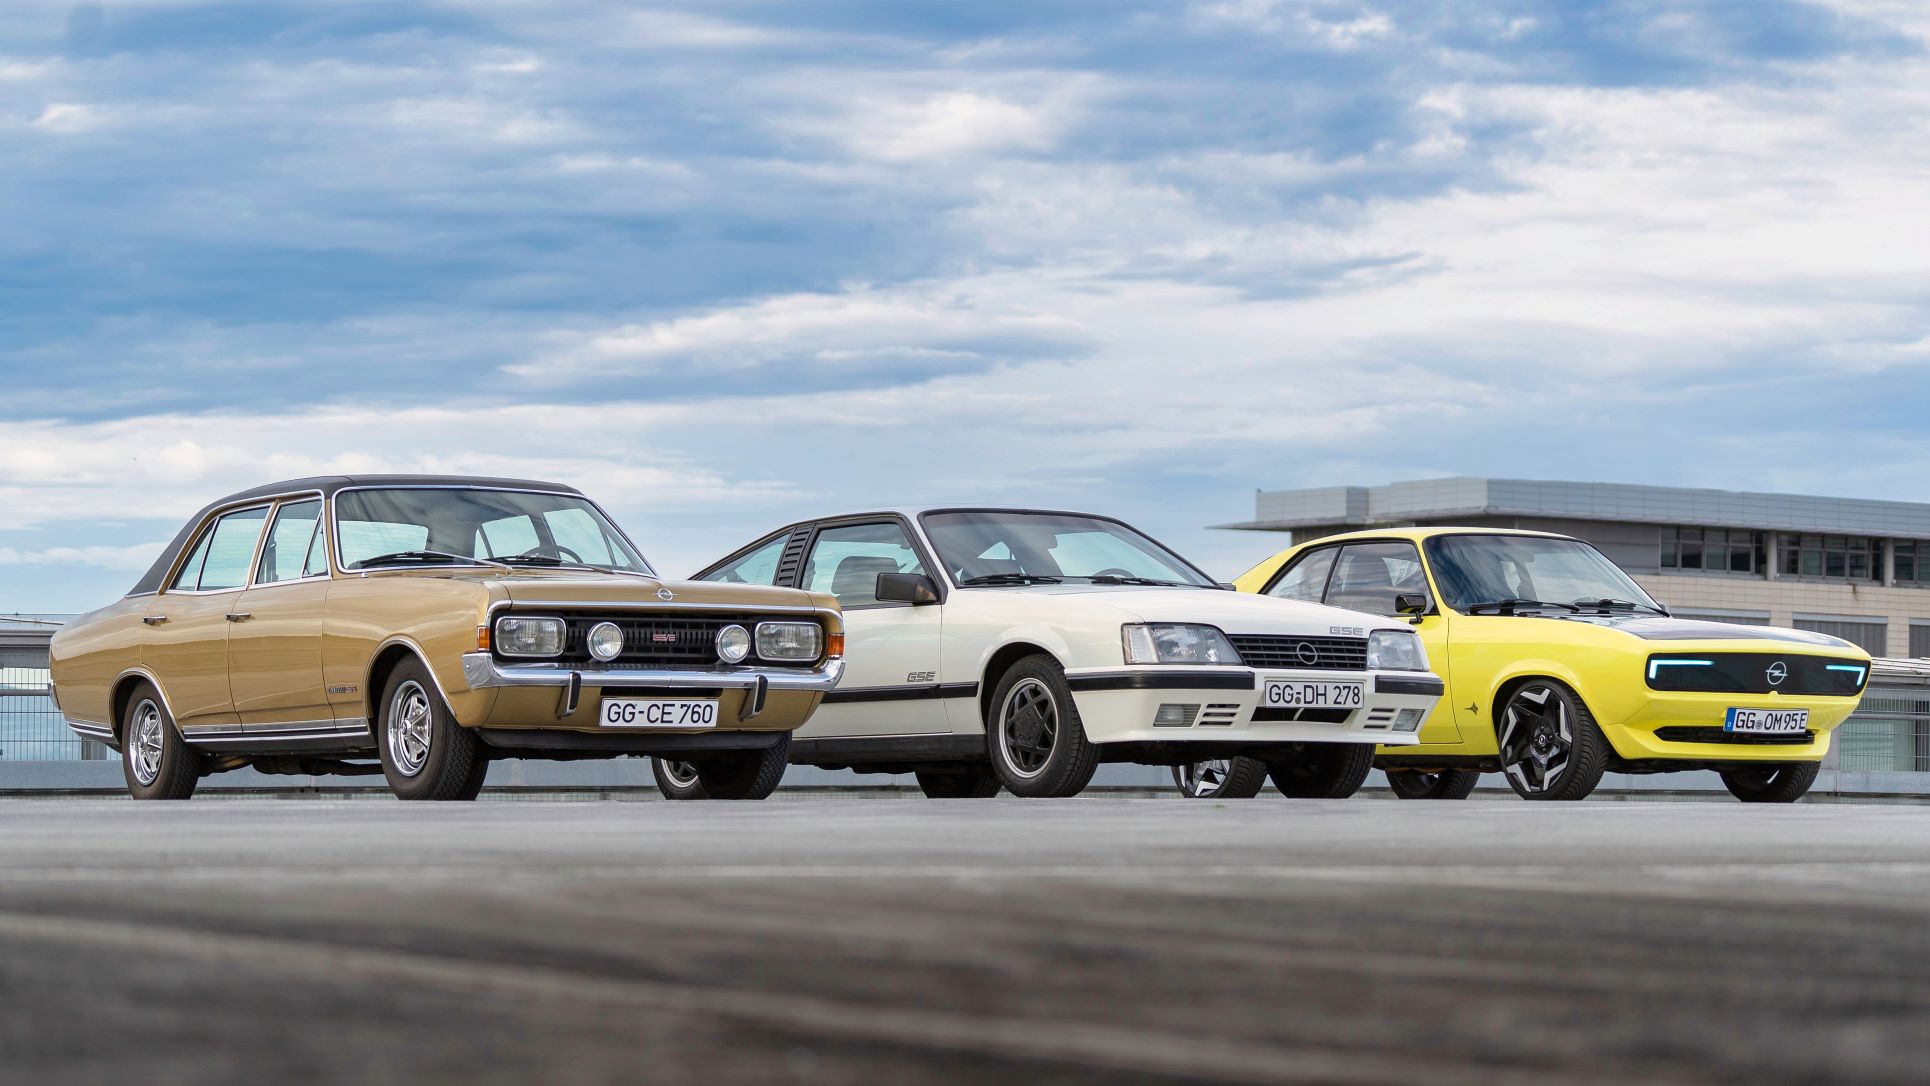 Cars from the Opel GSe range over the years